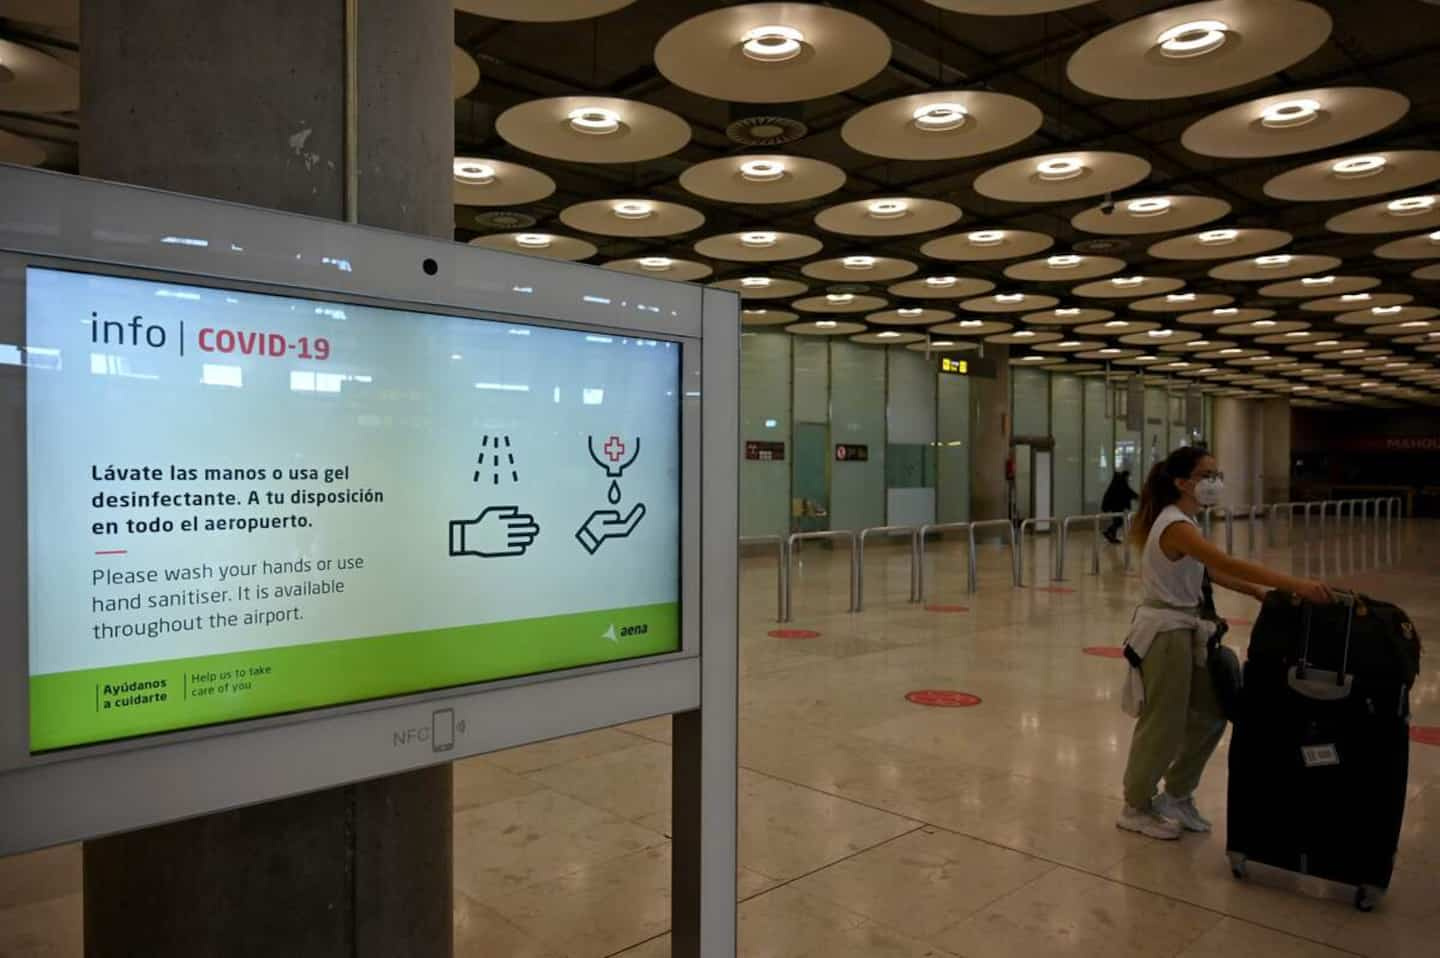 Covid: Spain introduces controls for travelers coming from China